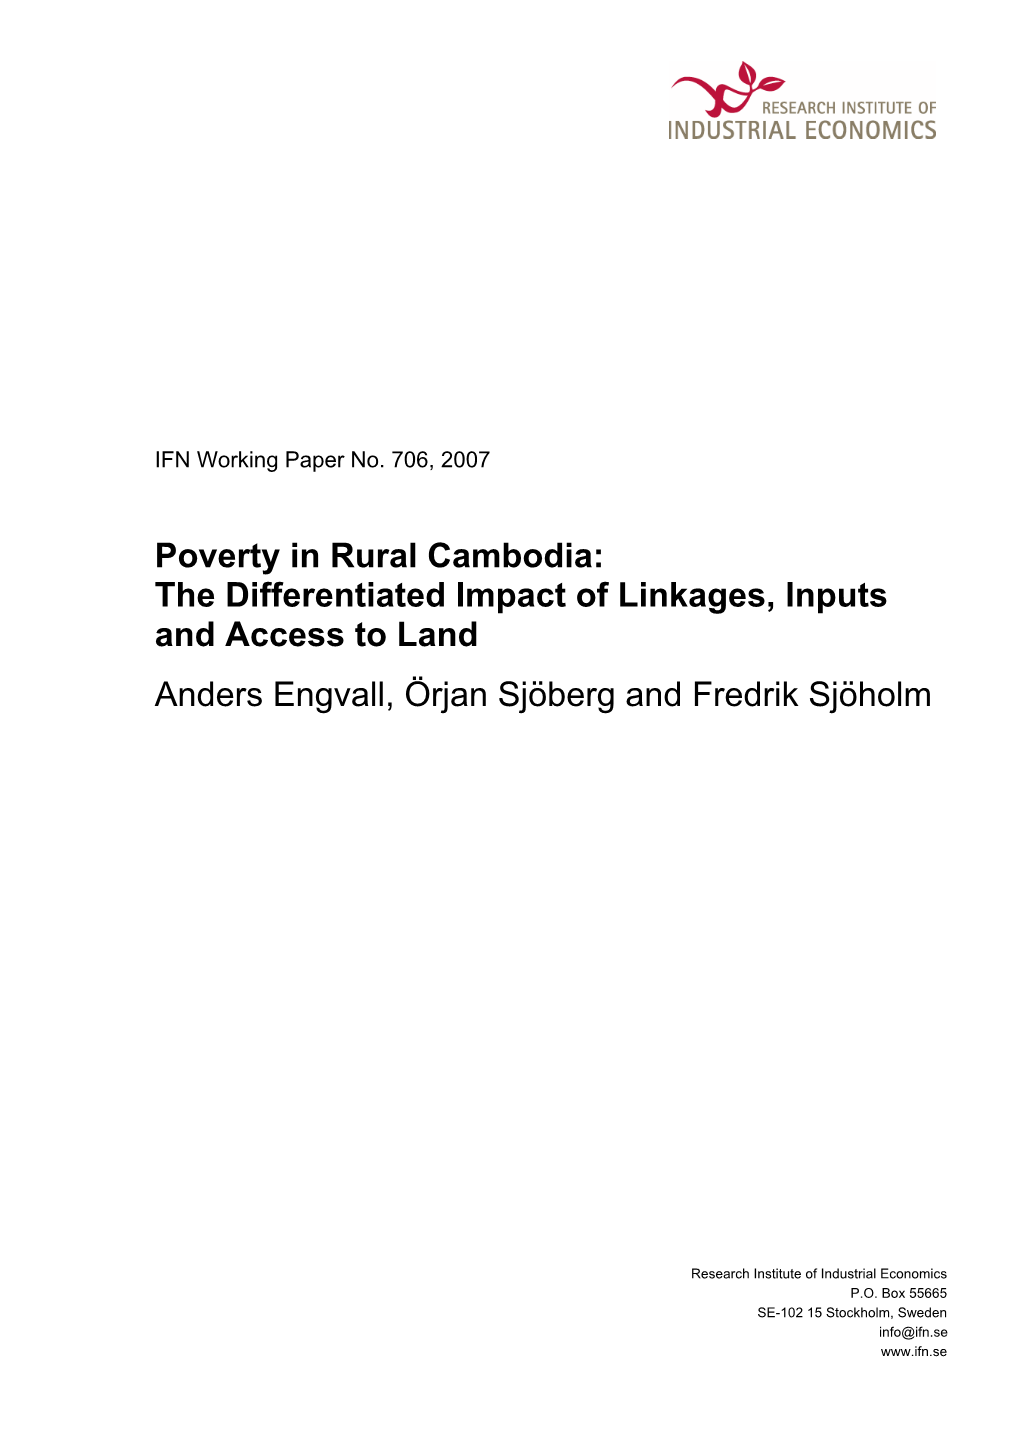 Poverty in Rural Cambodia: the Differentiated Impact of Linkages, Inputs and Access to Land Anders Engvall, Örjan Sjöberg and Fredrik Sjöholm